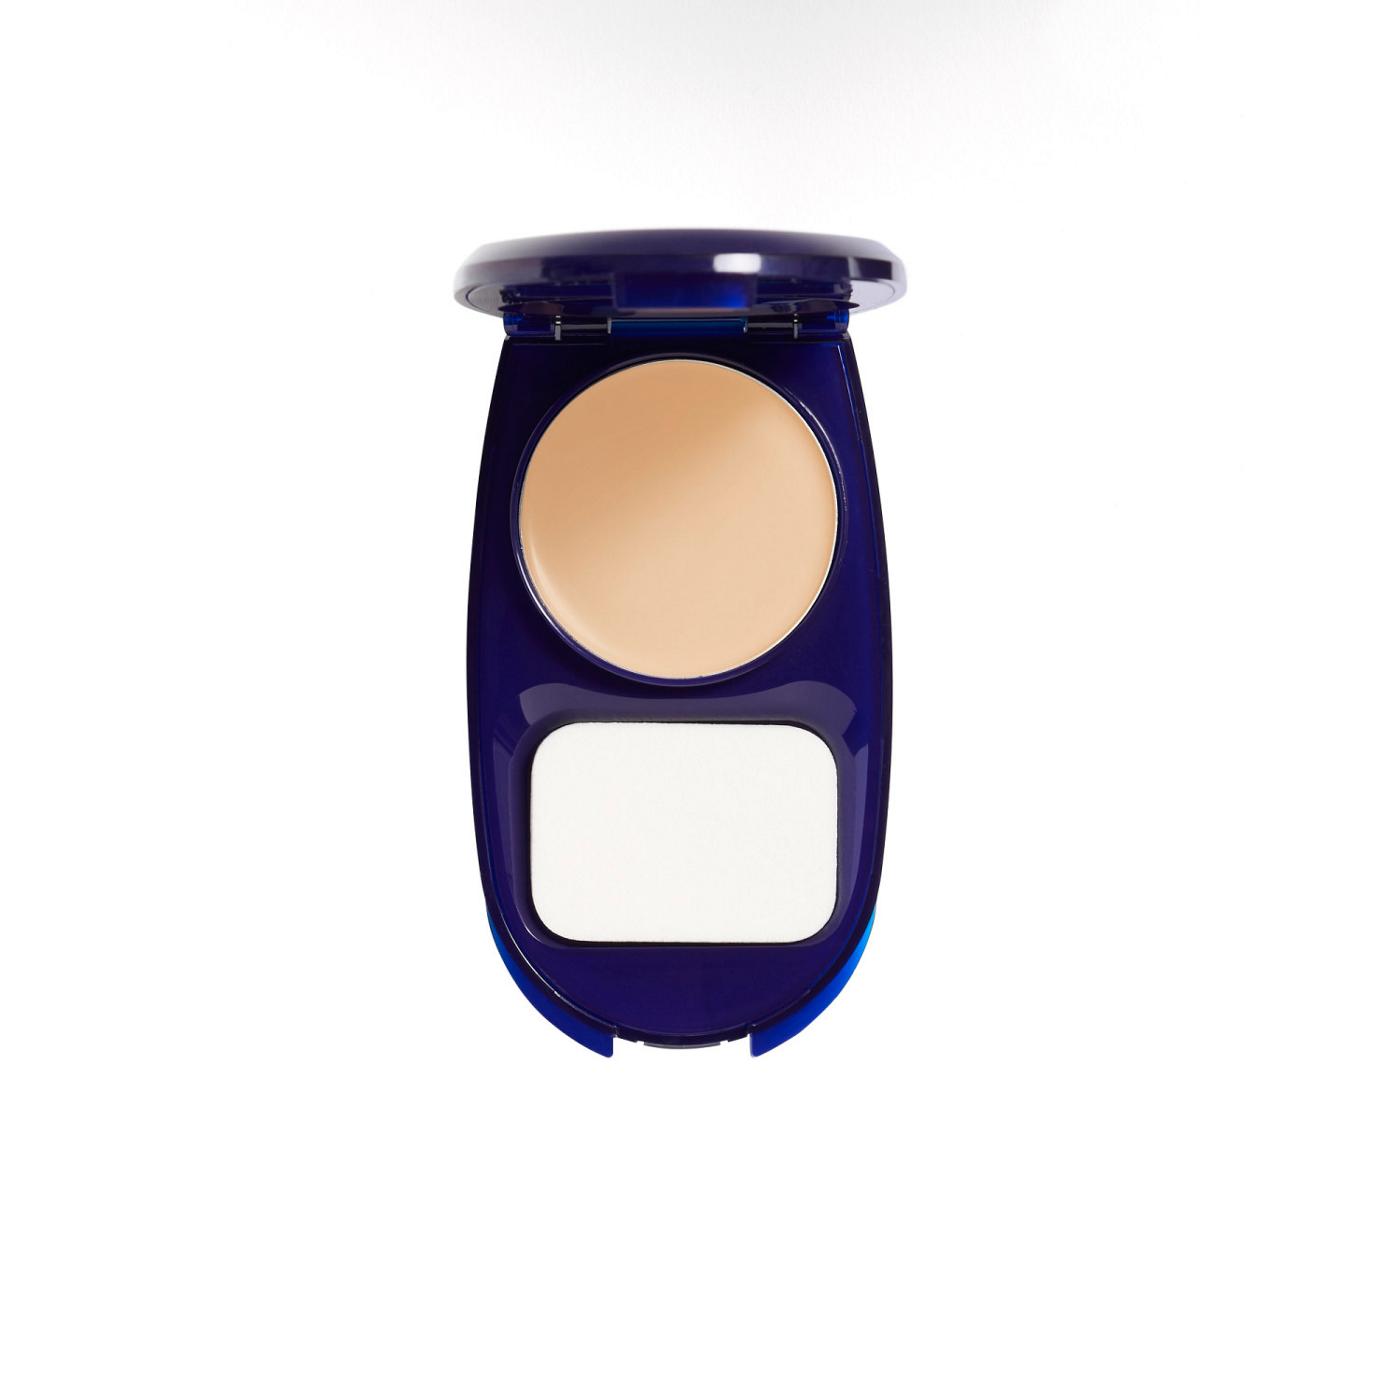 Covergirl Aqua Smooth Foundation Compact 710 Classic Ivory; image 2 of 2